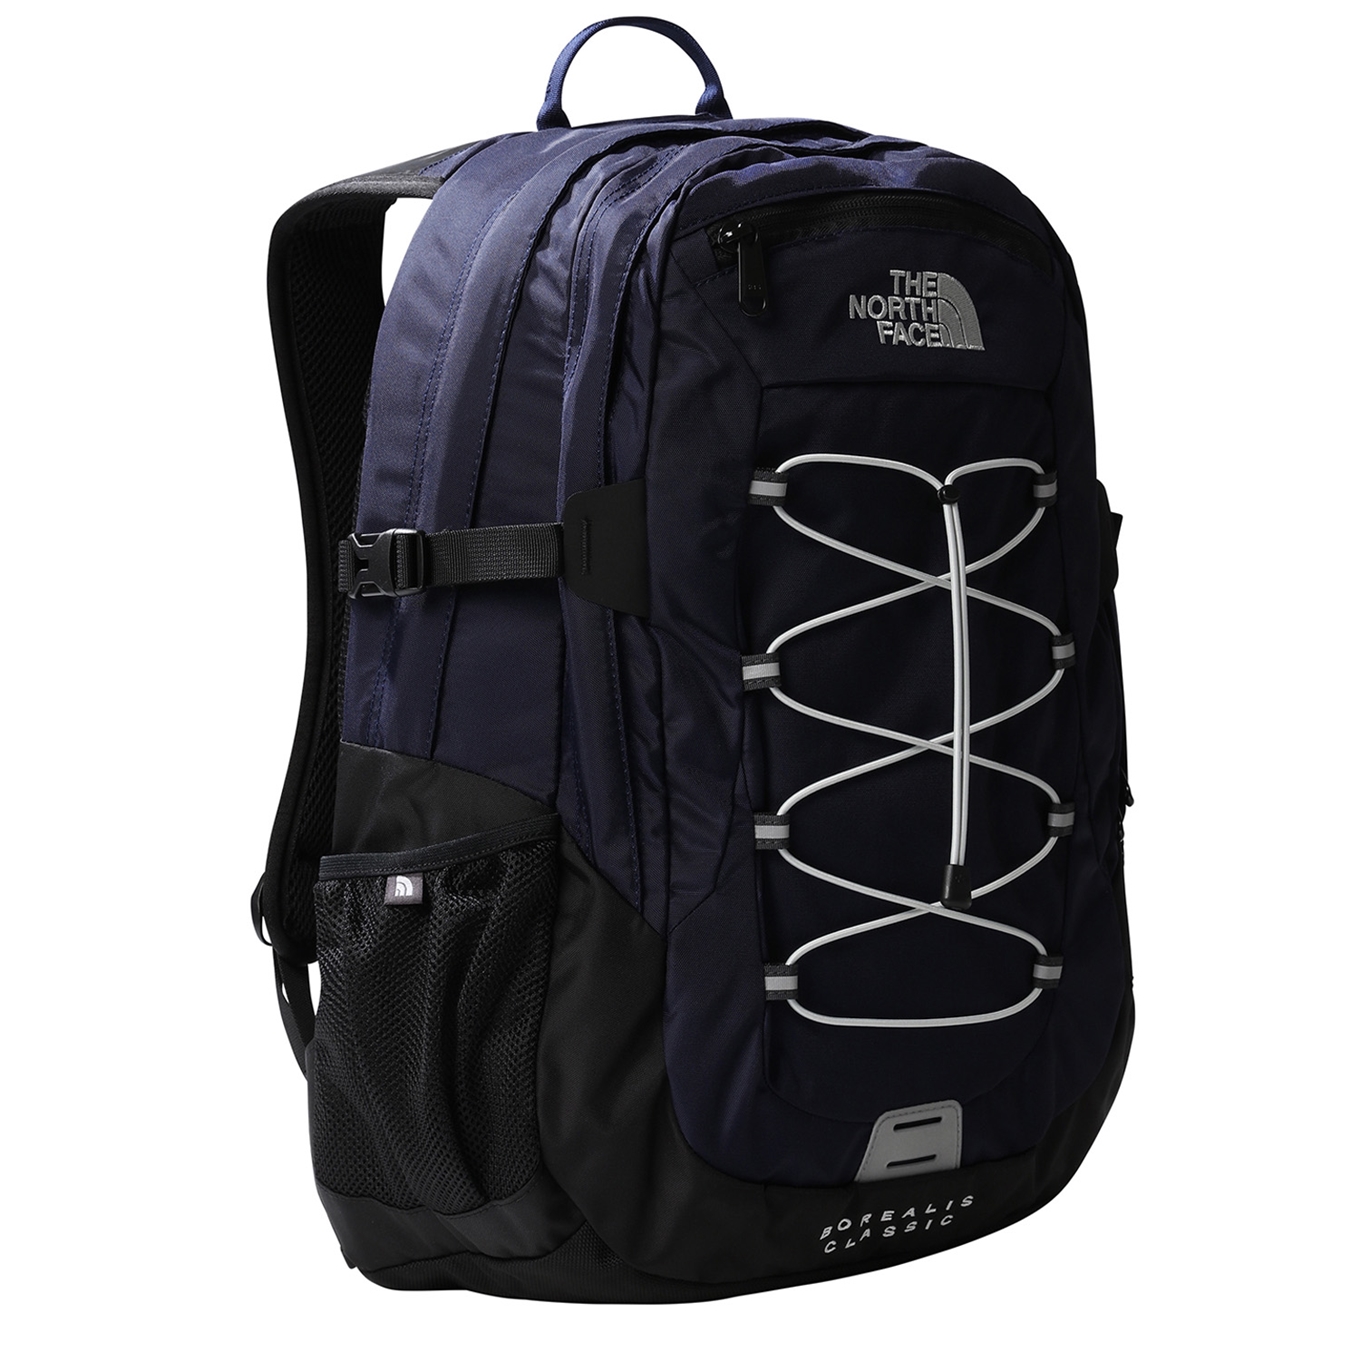 The North Face Borealis Classic navy backpack